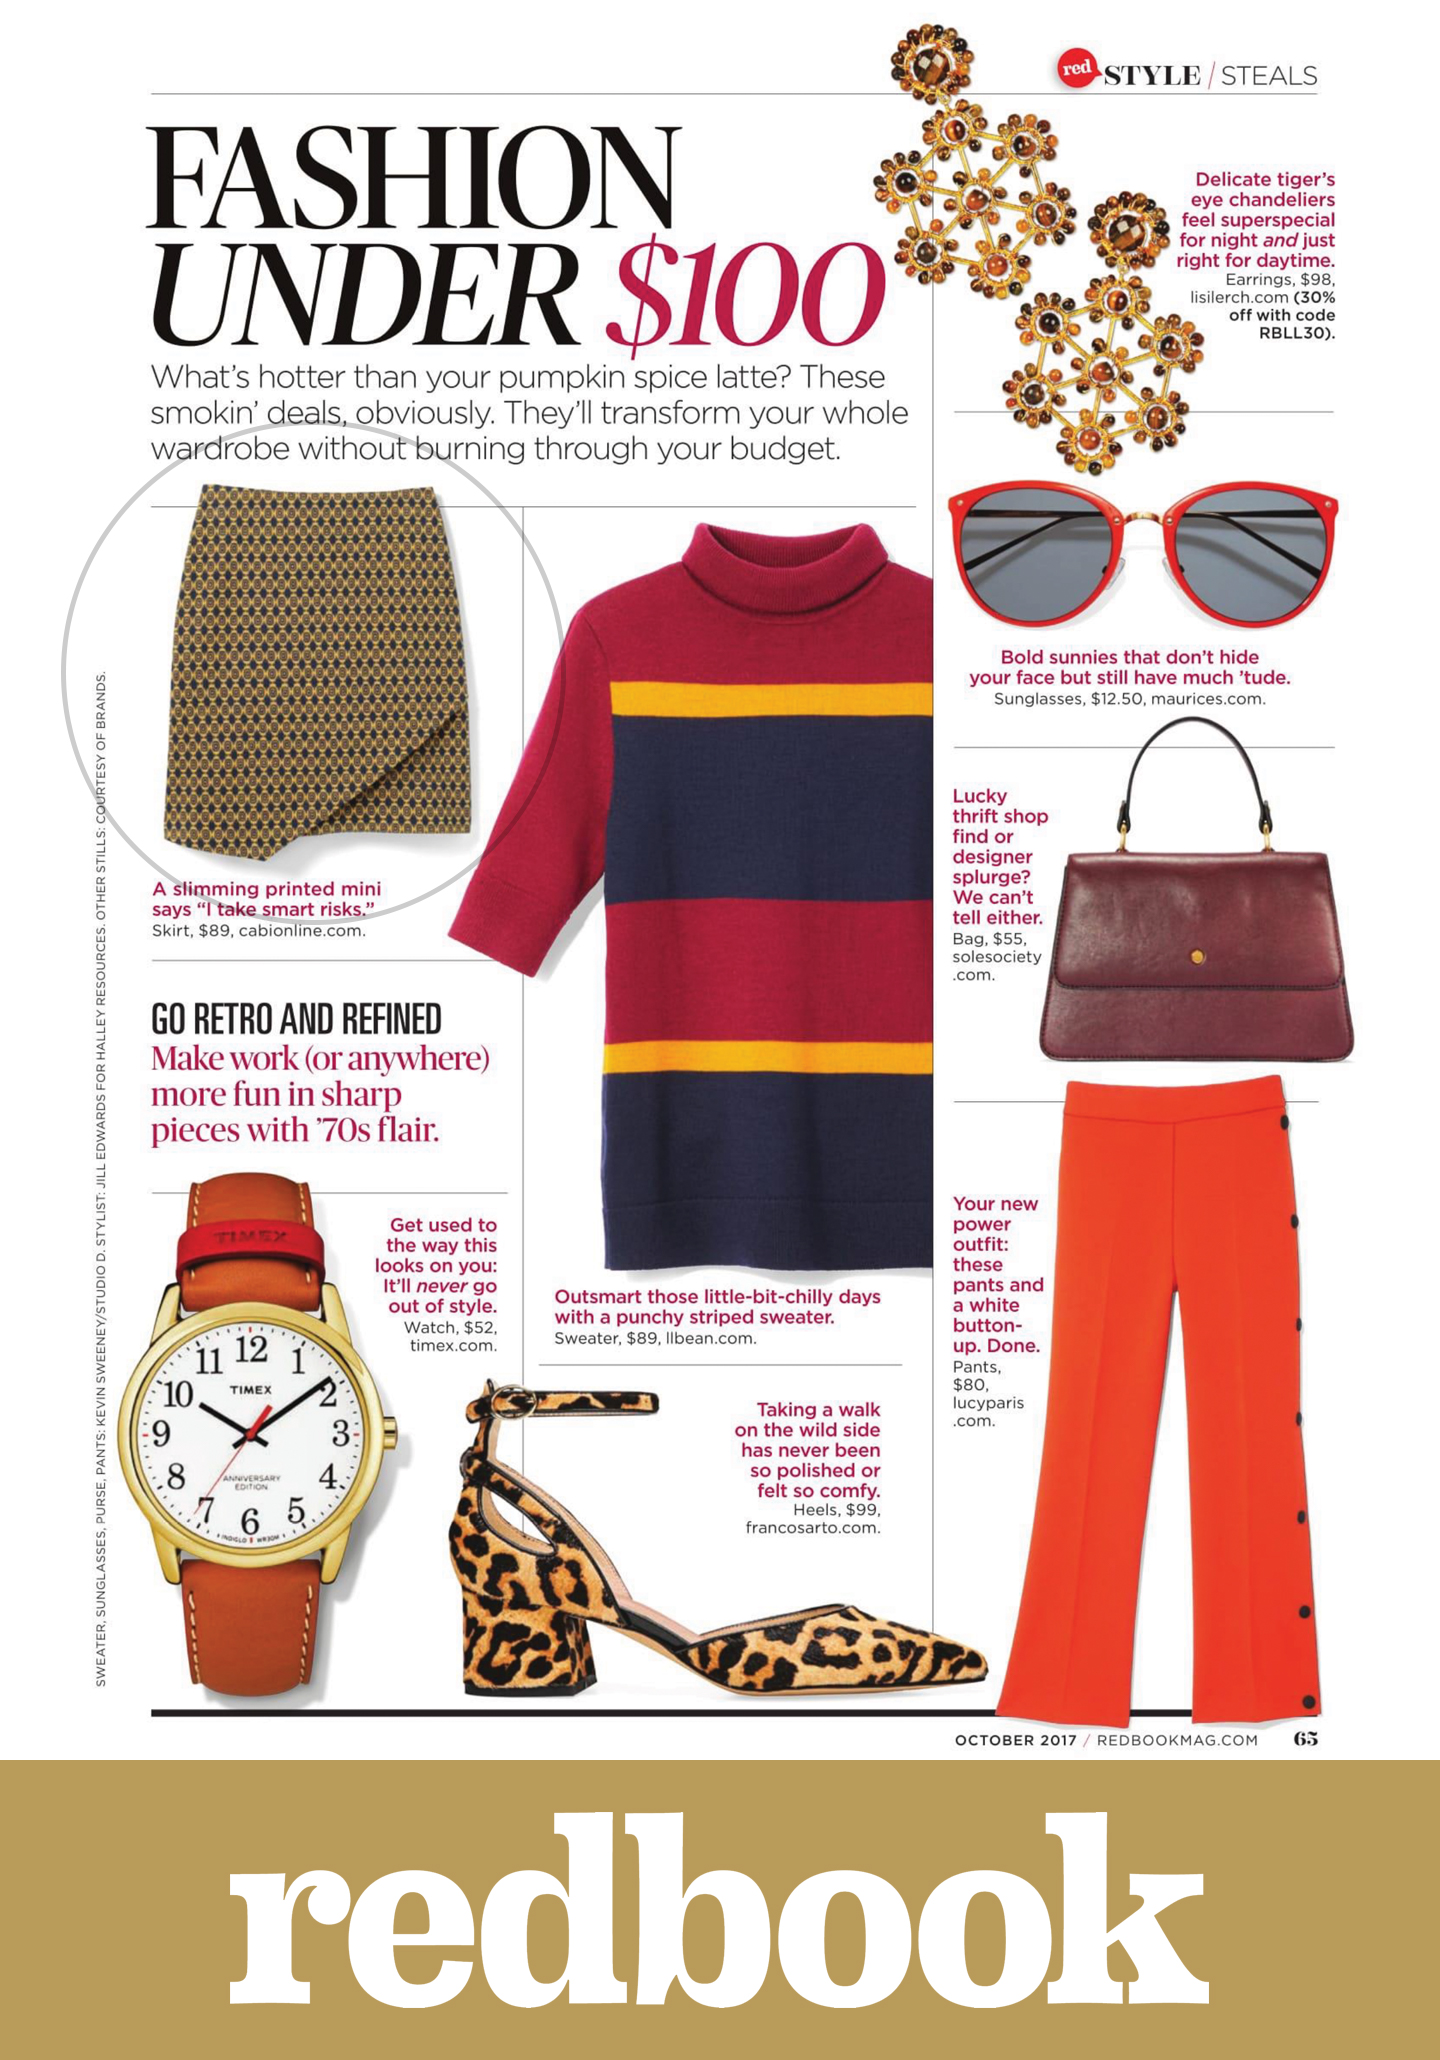 Spotted in Redbook: cabi’s Fall 2017 Standout Skirt